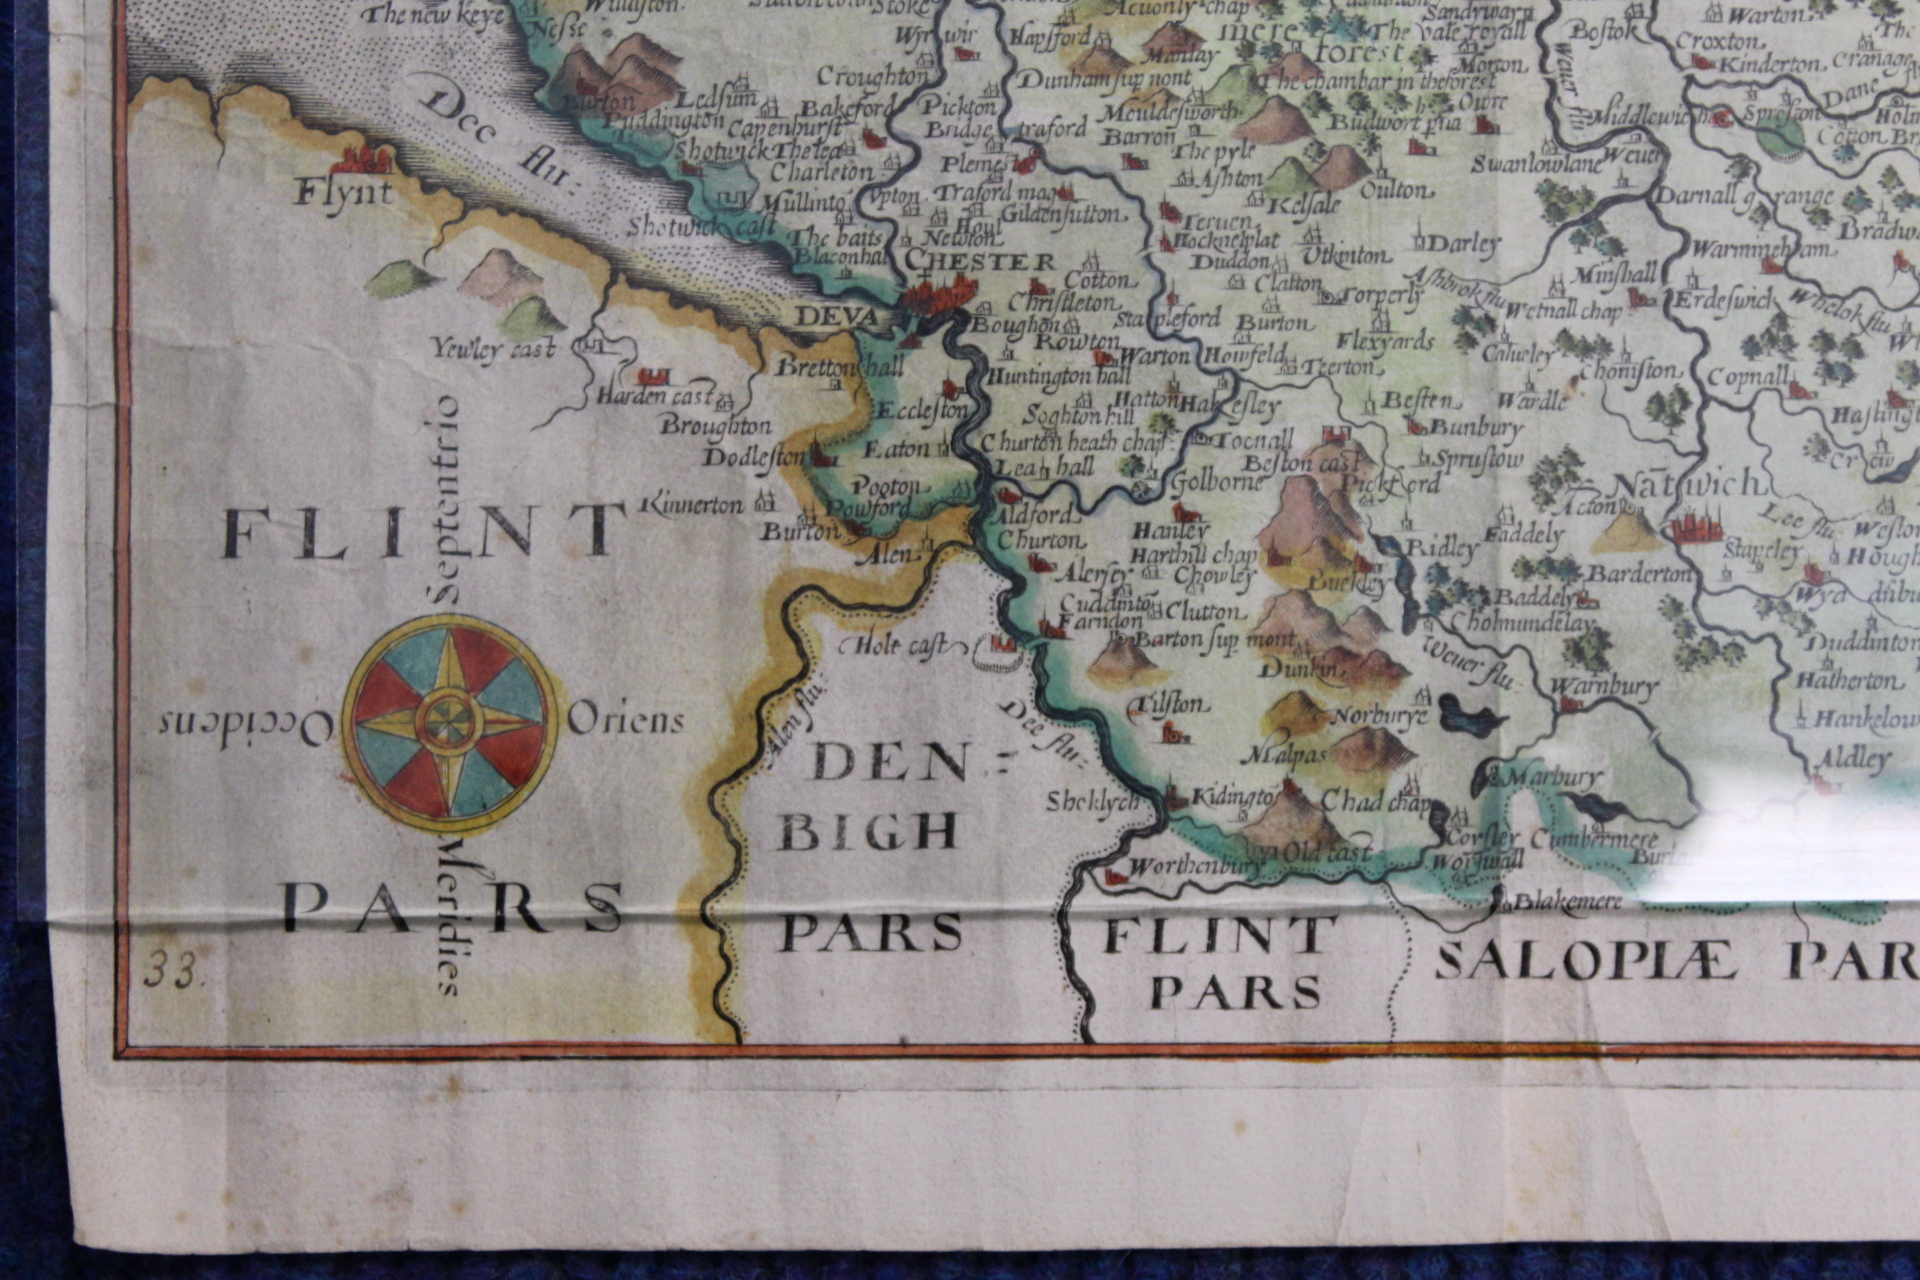 SAXTON CHRISTOPHER.  Cestriae (Cheshire). Antique hand coloured eng. map. 11" x 12", rolled, c.1610. - Image 14 of 27